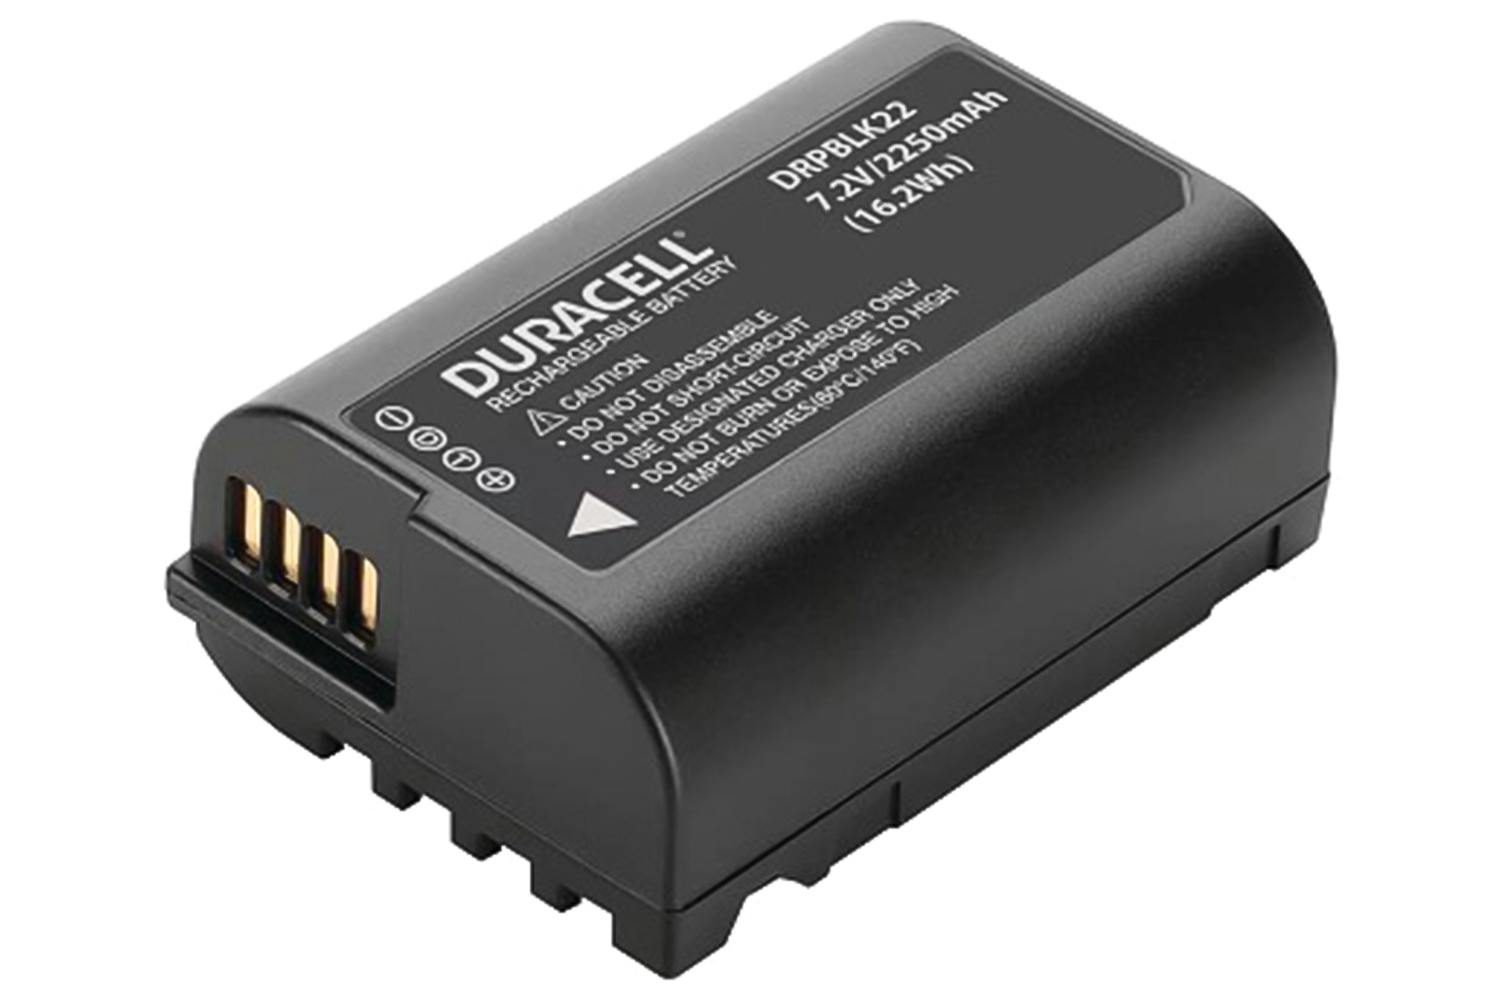 Duracell Camera Battery Replacement for Panasonic DMW-BLK22